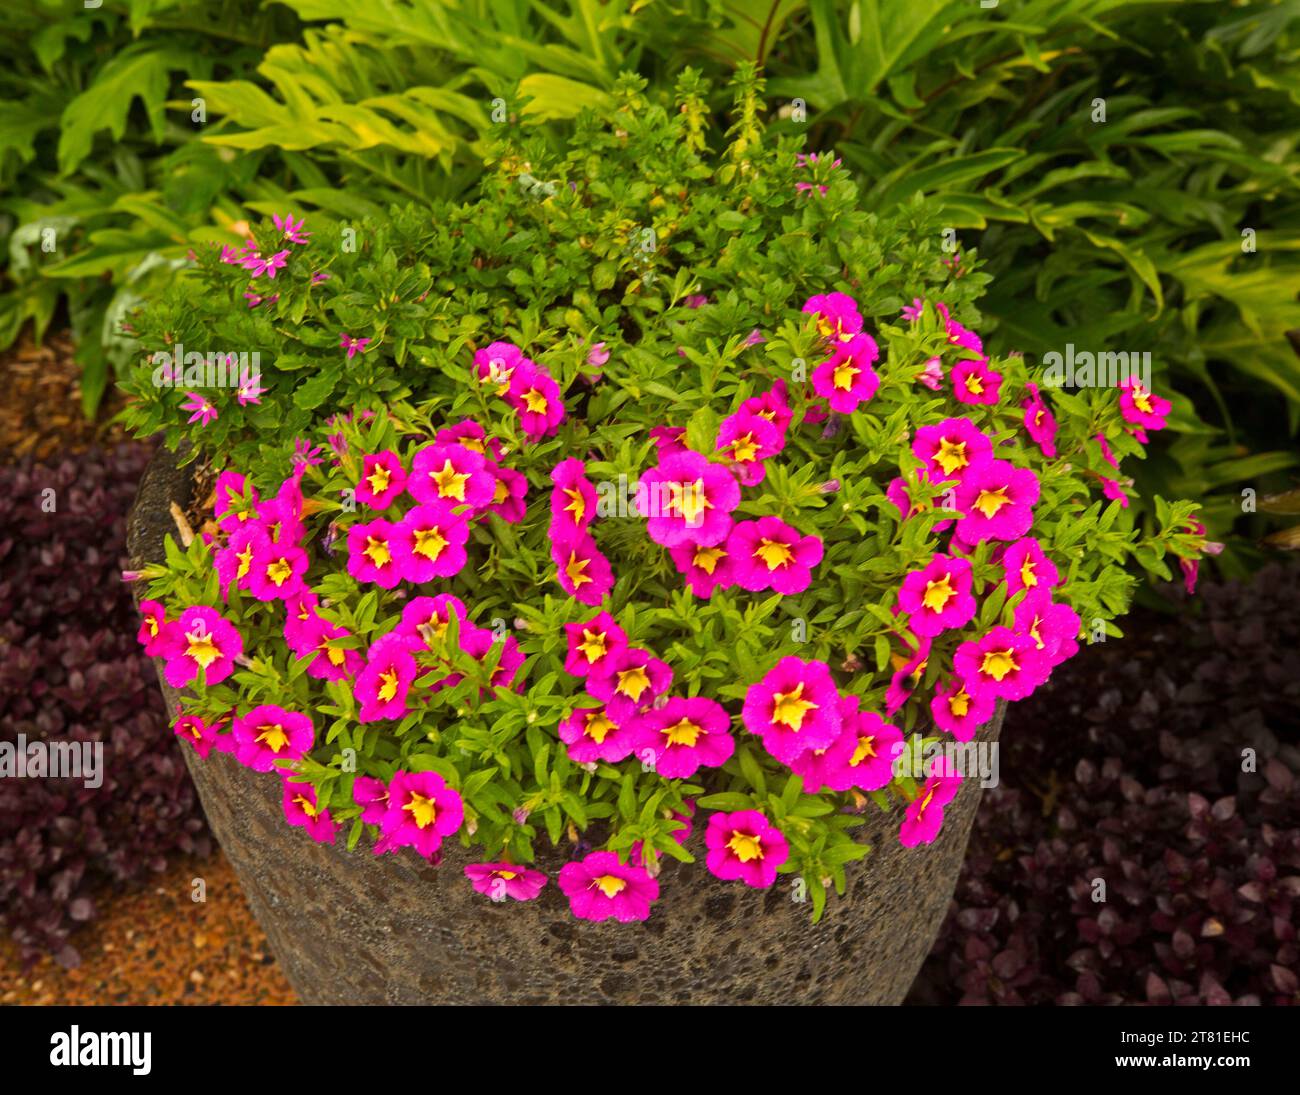 Spectacular Calibrachoa perennial petunia, with masses of vivid pink / red flowers with yellow centres growing in a brown container in Australia Stock Photo